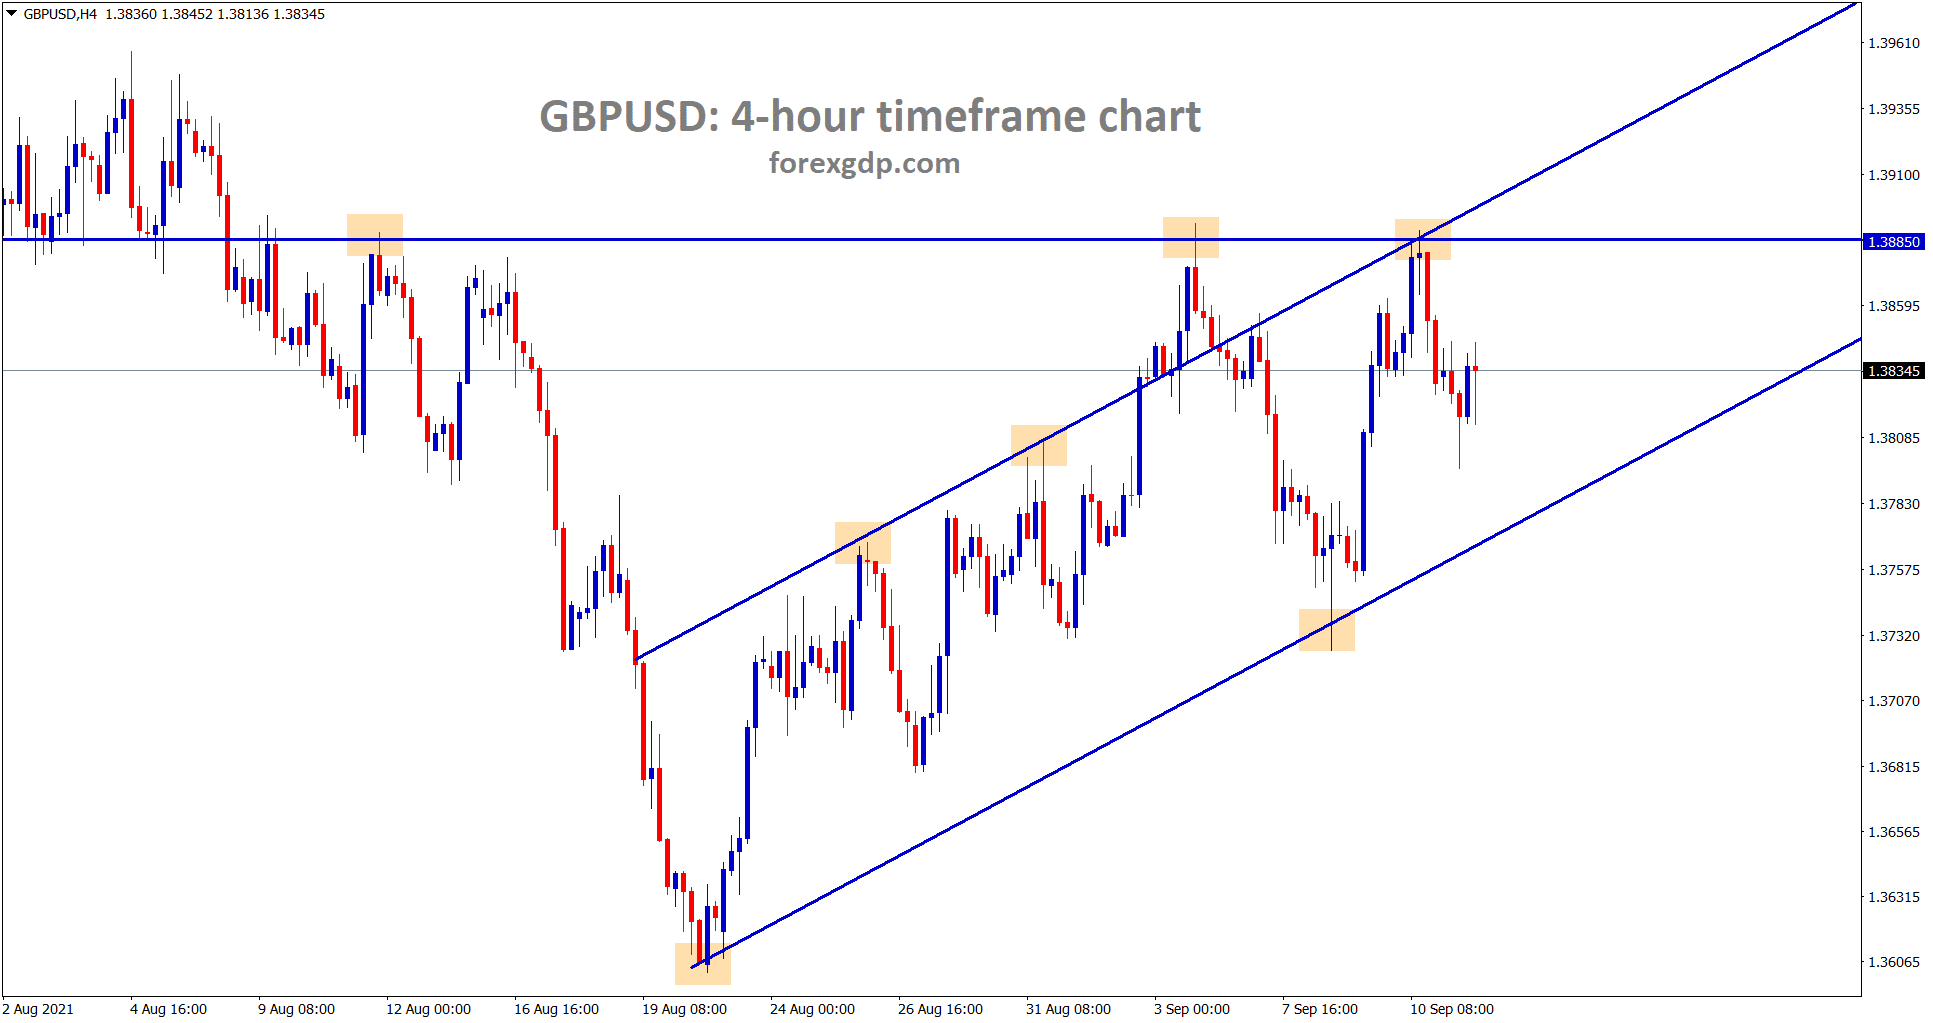 GBPUSD is moving in an Ascending channel line